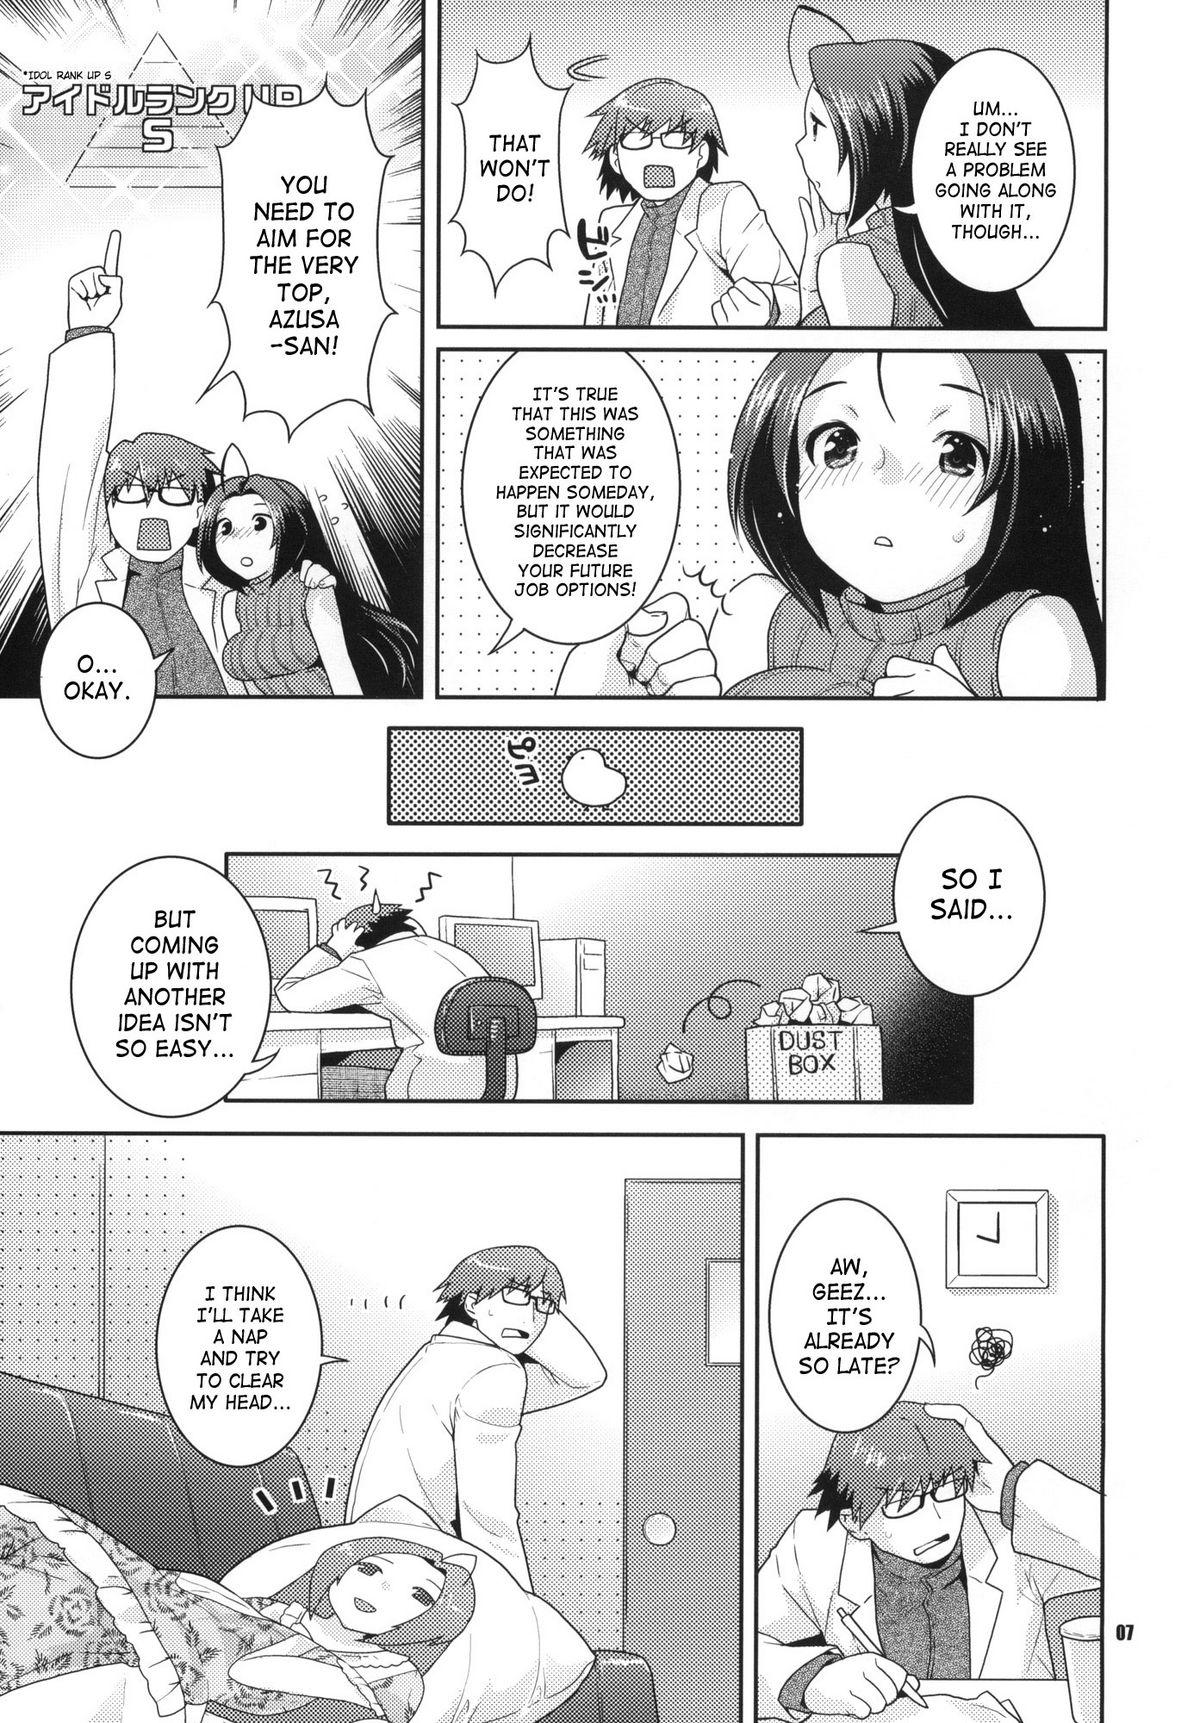 Chacal Juicy Pillow Talk - The idolmaster Swedish - Page 6